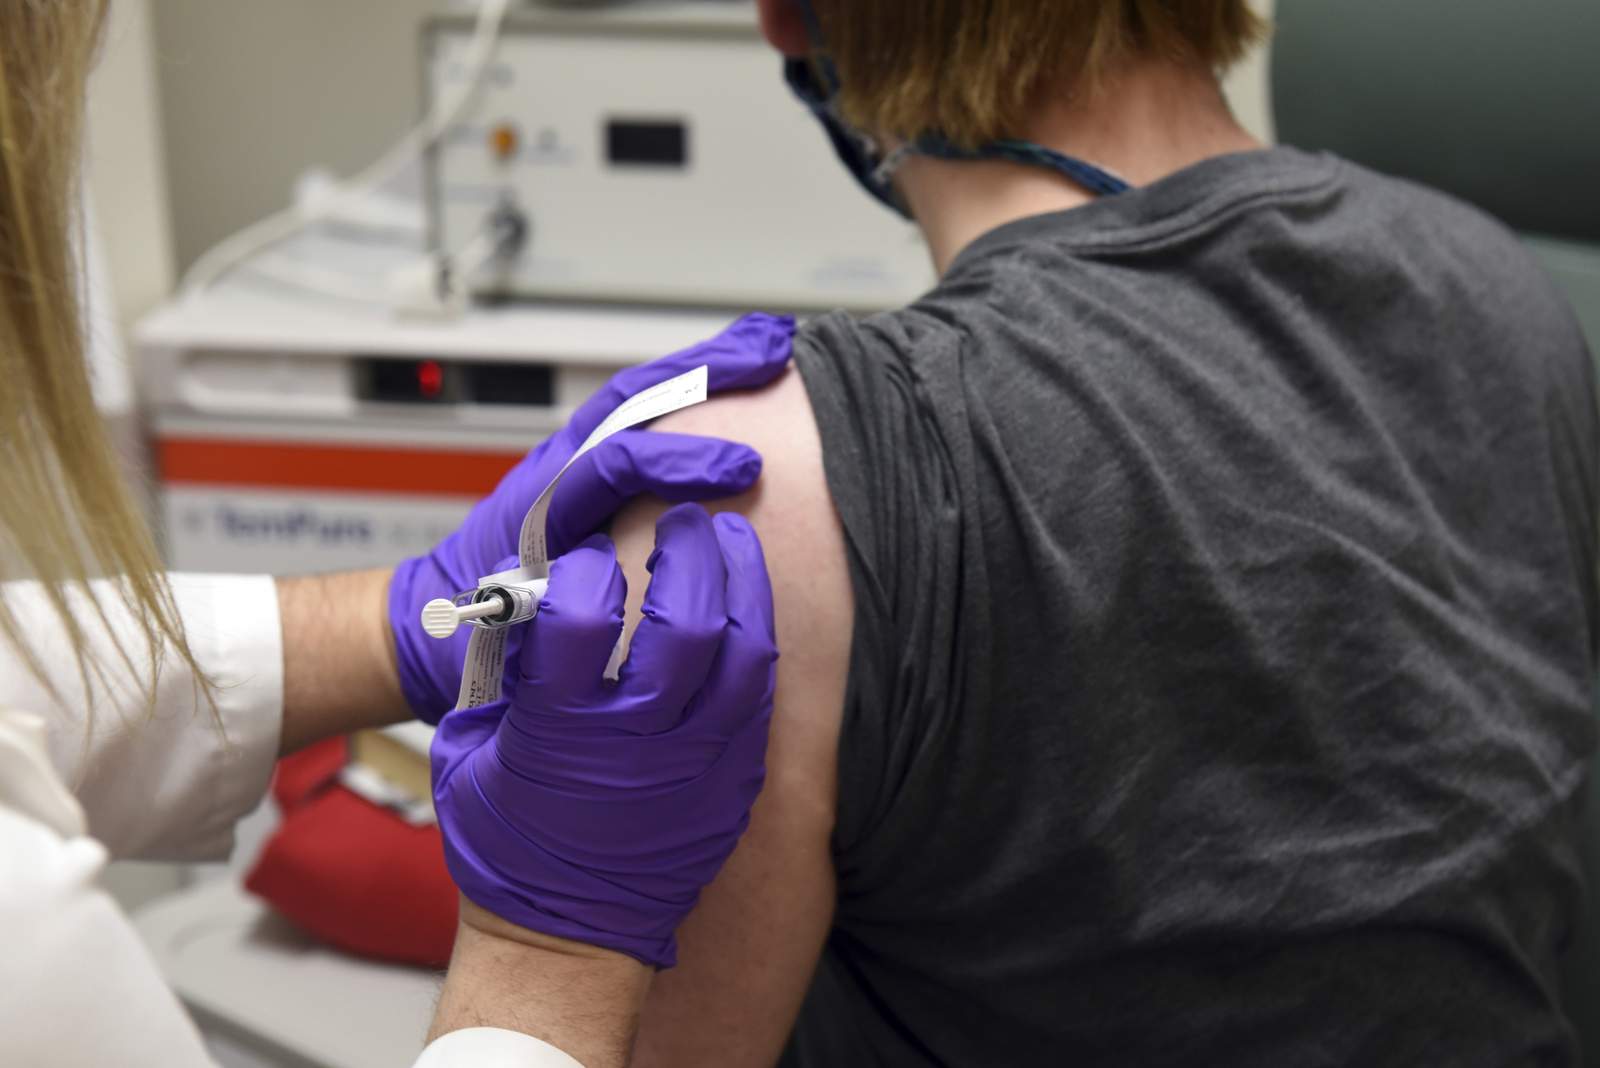 U.S. government to pay for coronavirus vaccine costs